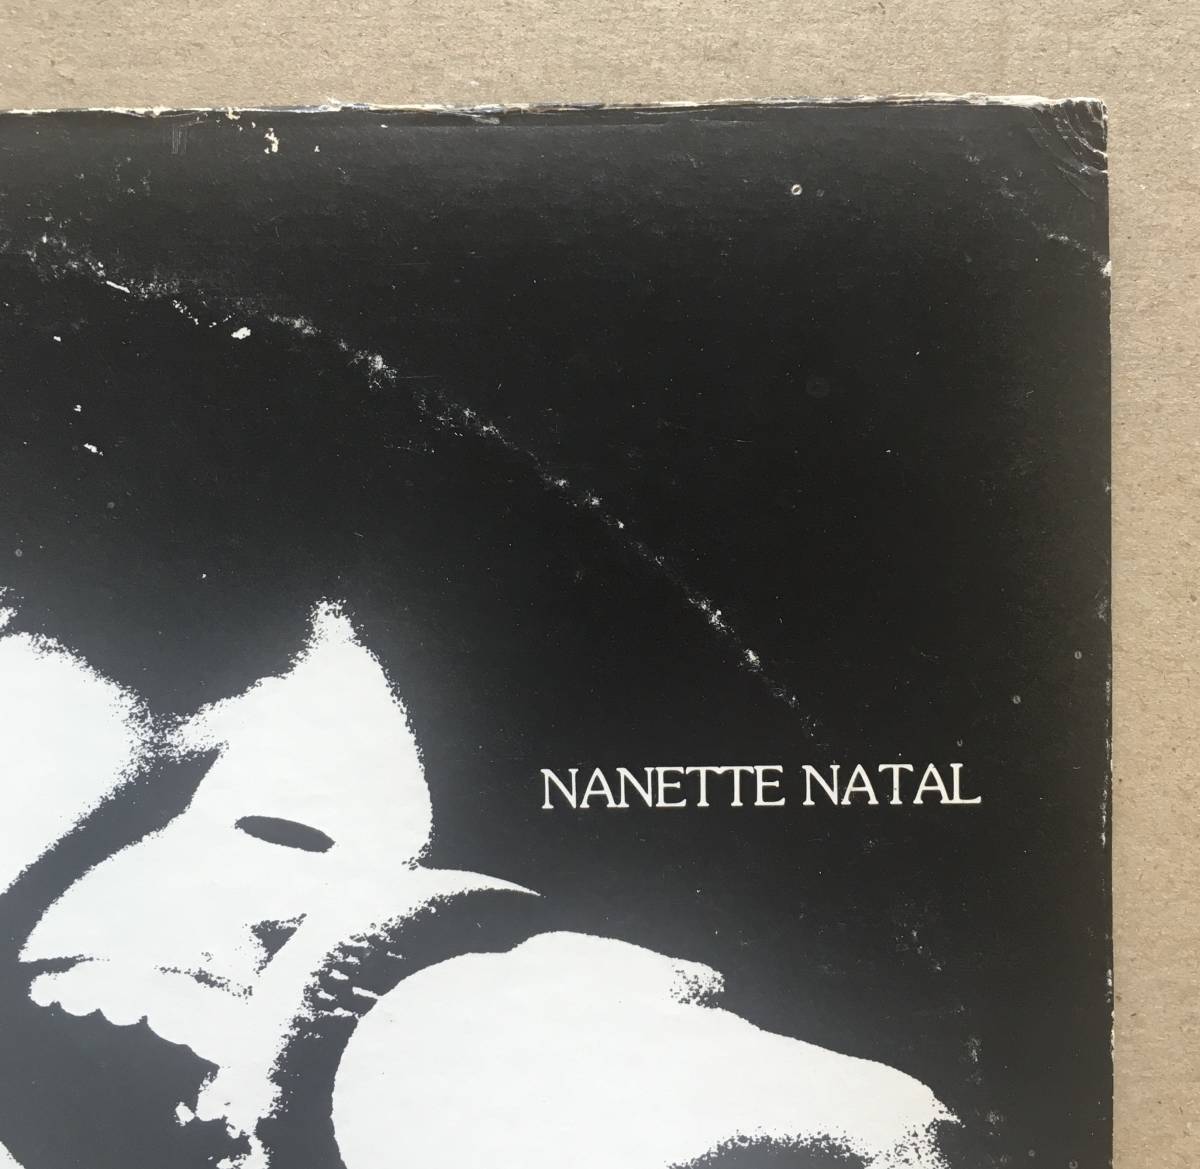 LP★ Nanette Natal / My Song Of Something 希少USオリジナル盤 1980年 Benyo Music “It’s Over” “Love Signs” BY-3333 _画像4